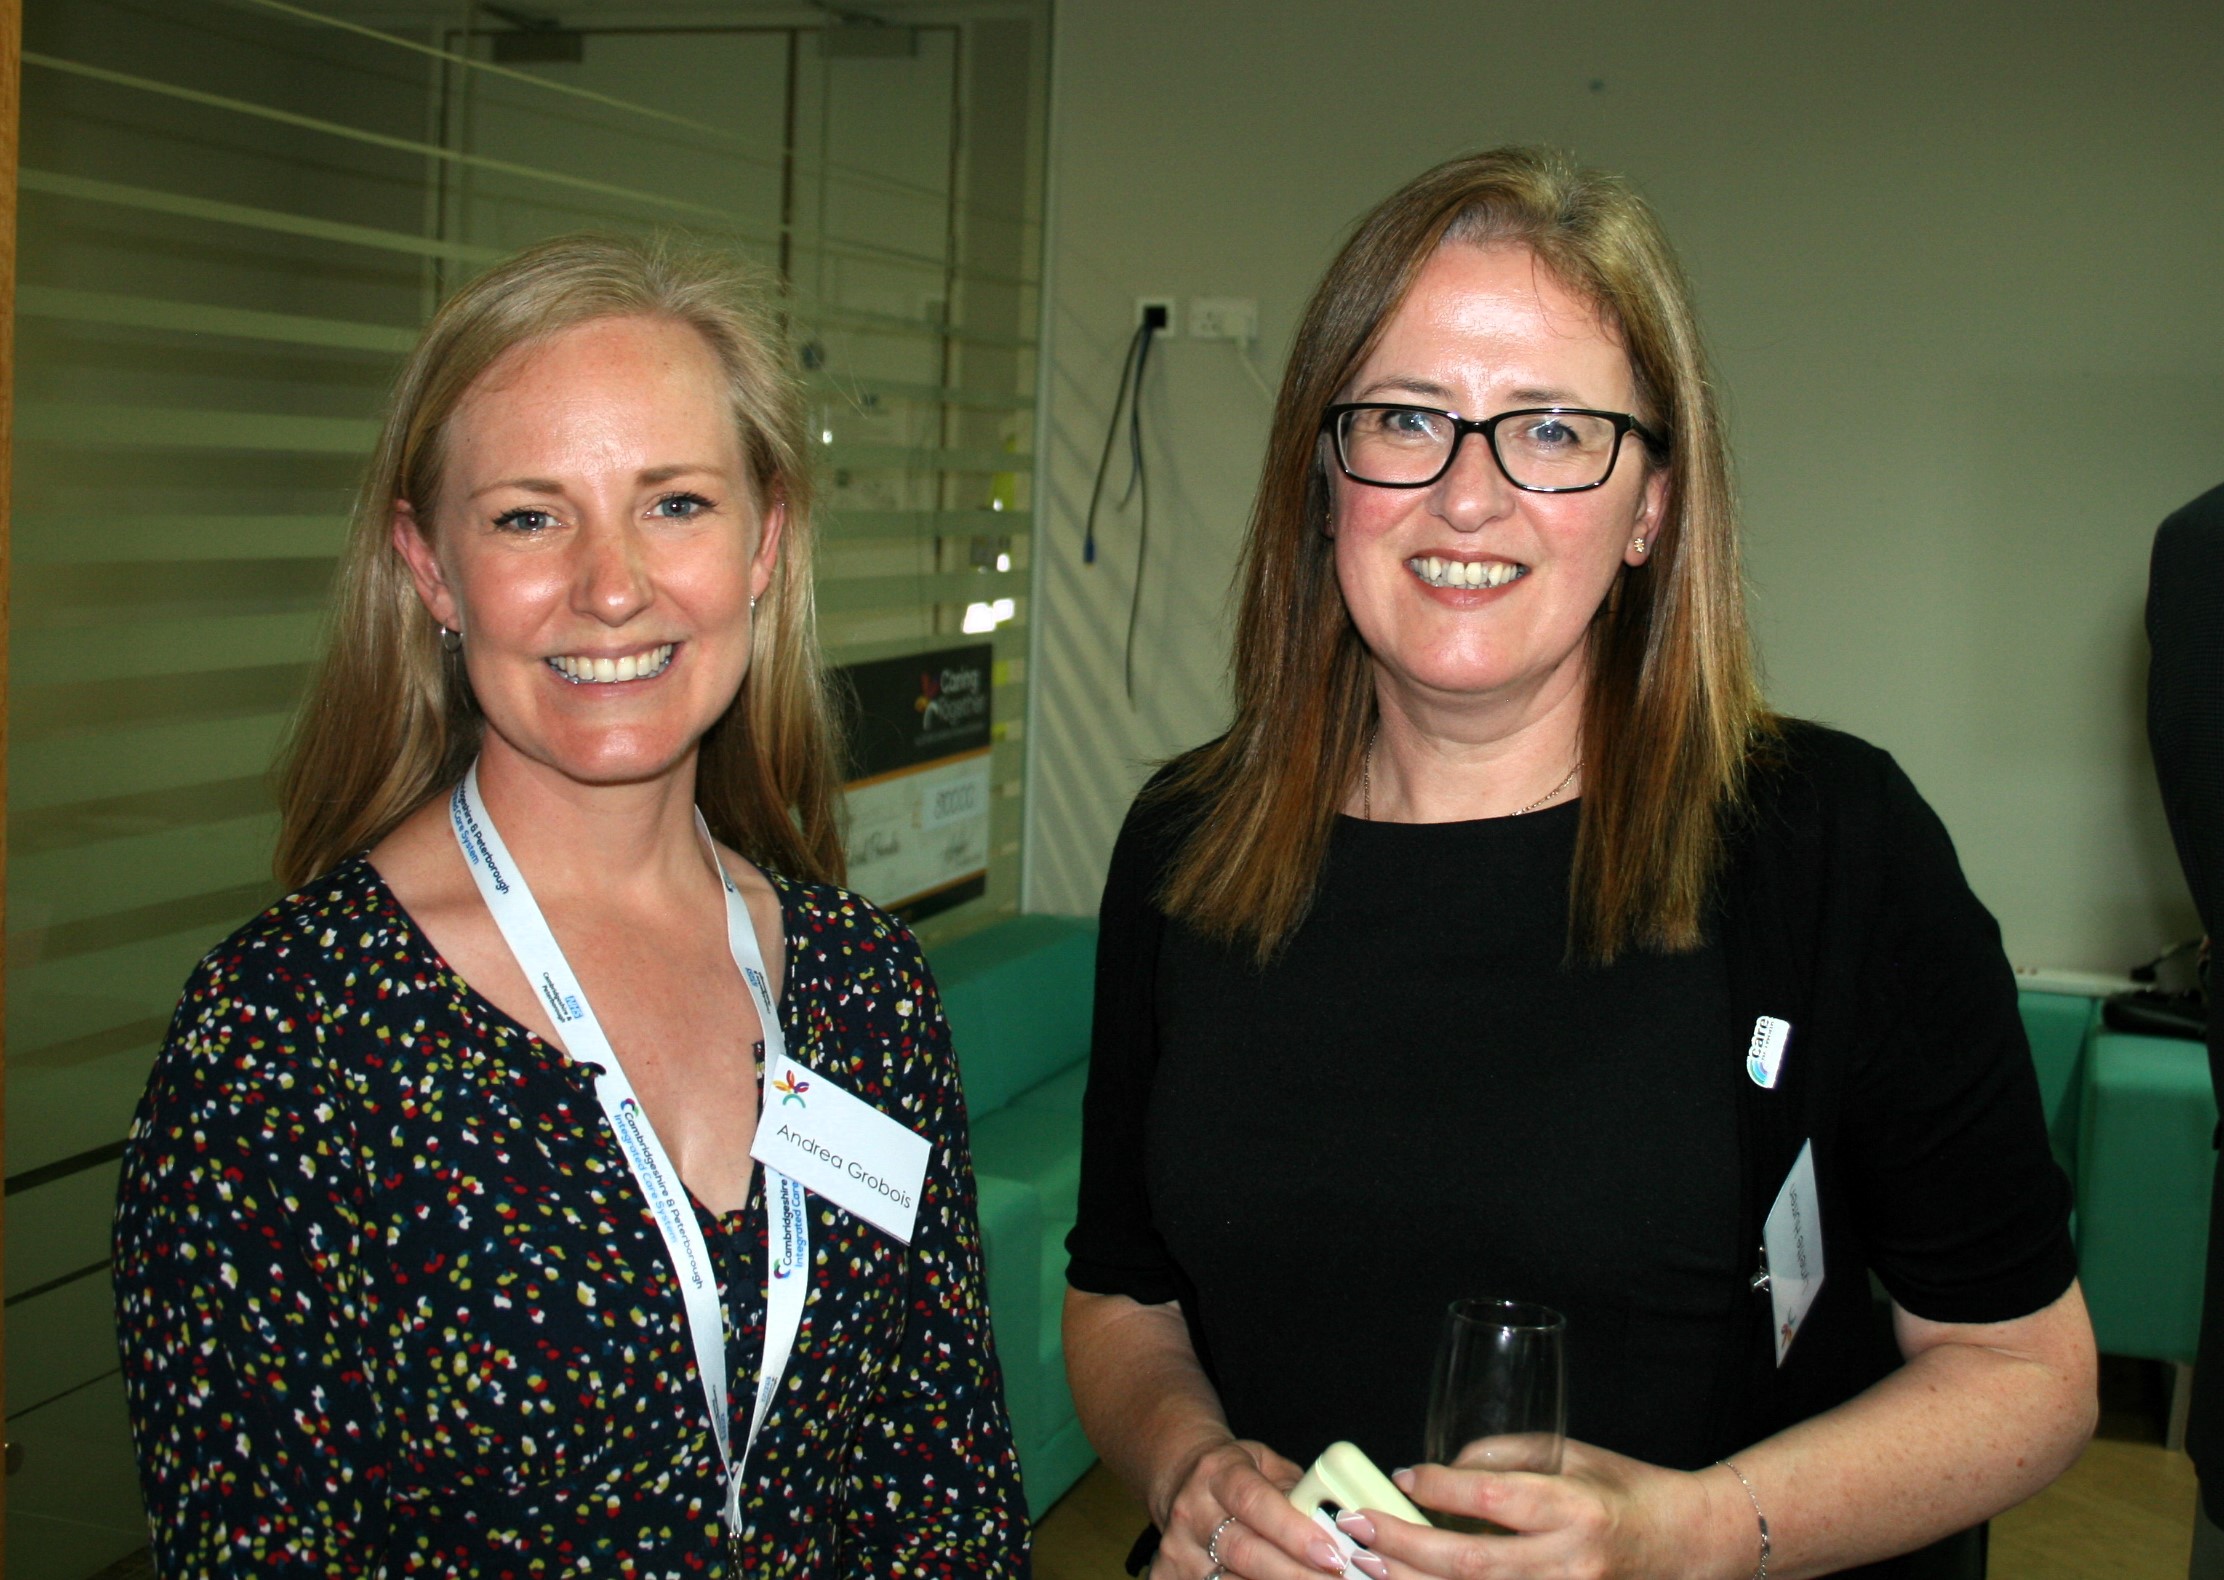 Andréa Grosbois - Assistant Director of Community and Strategic Partnerships at Cambridgeshire & Peterborough ICS and Lynette Hurren